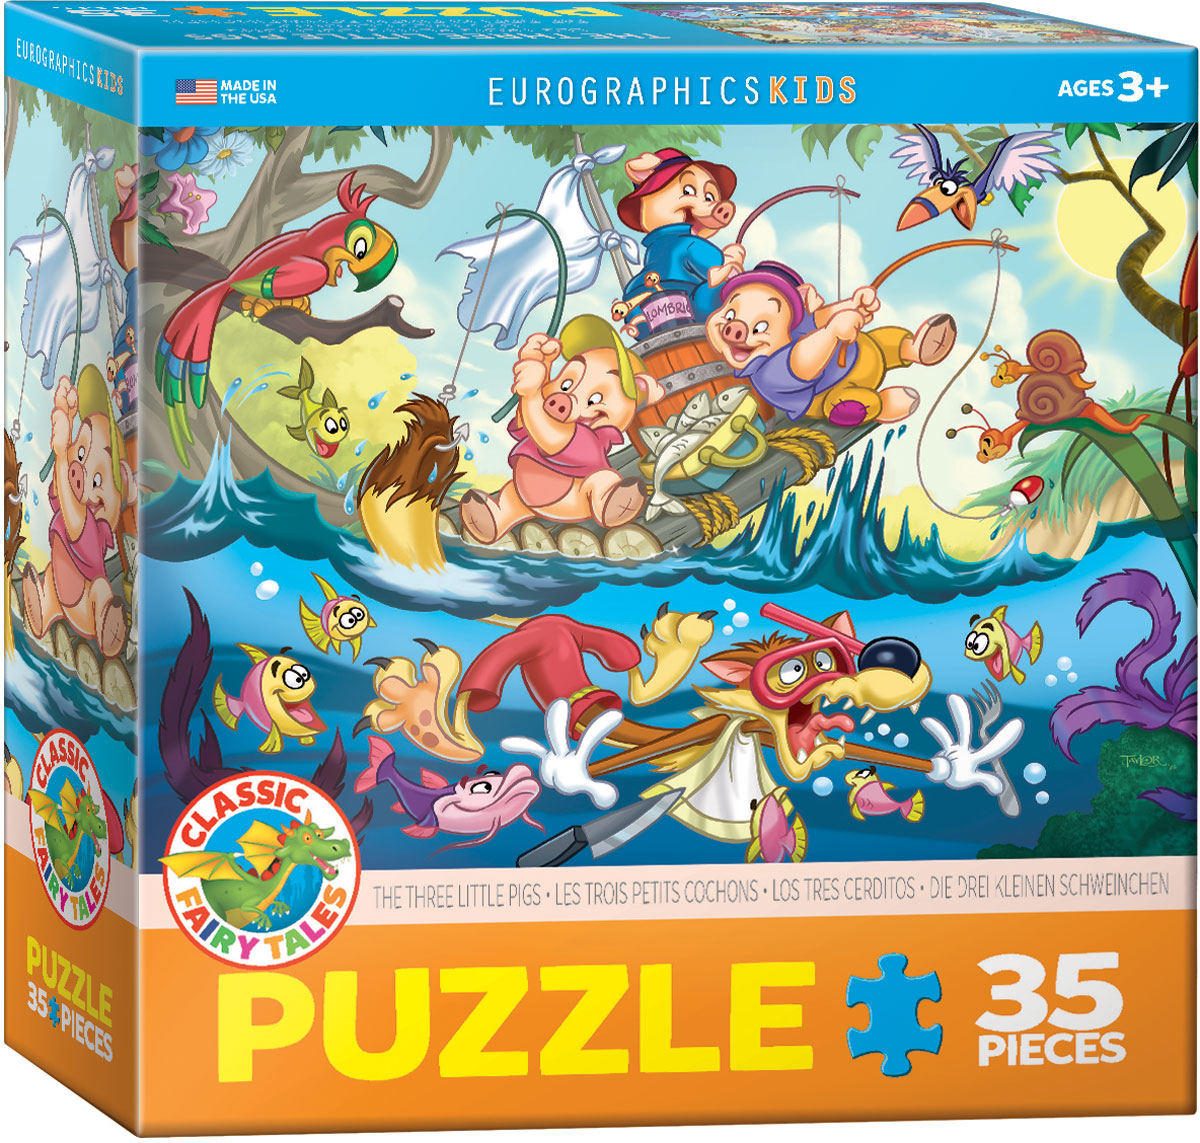 Puzzle: Eurographics 35 The Three Little Pigs | Impulse Games and Hobbies